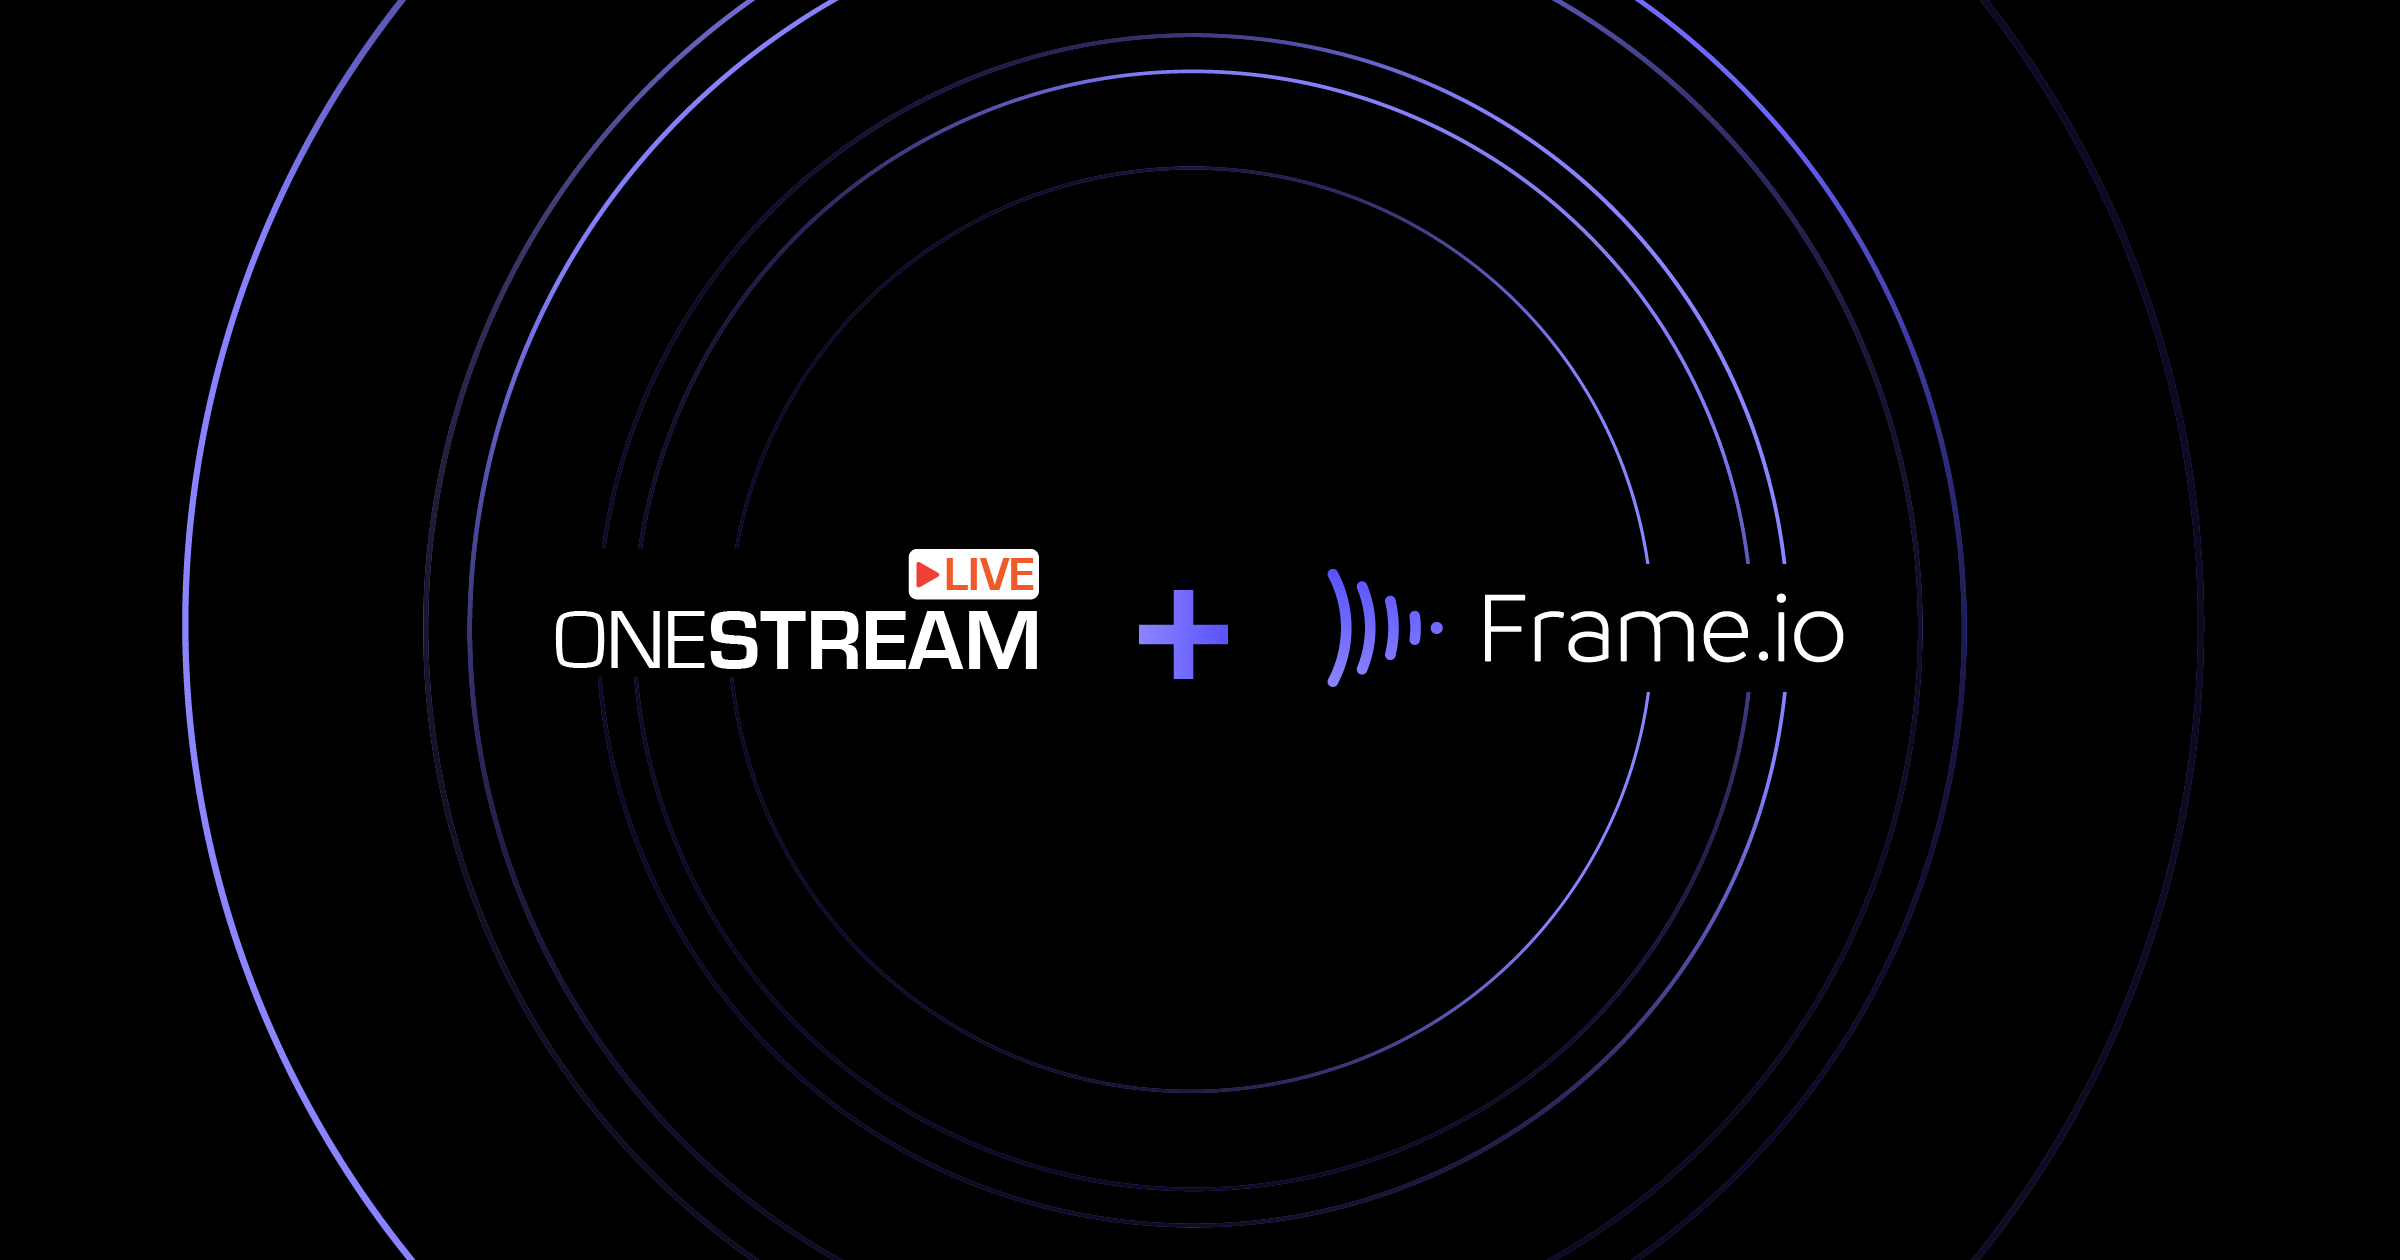 How to integrate Frame.io with OneStream